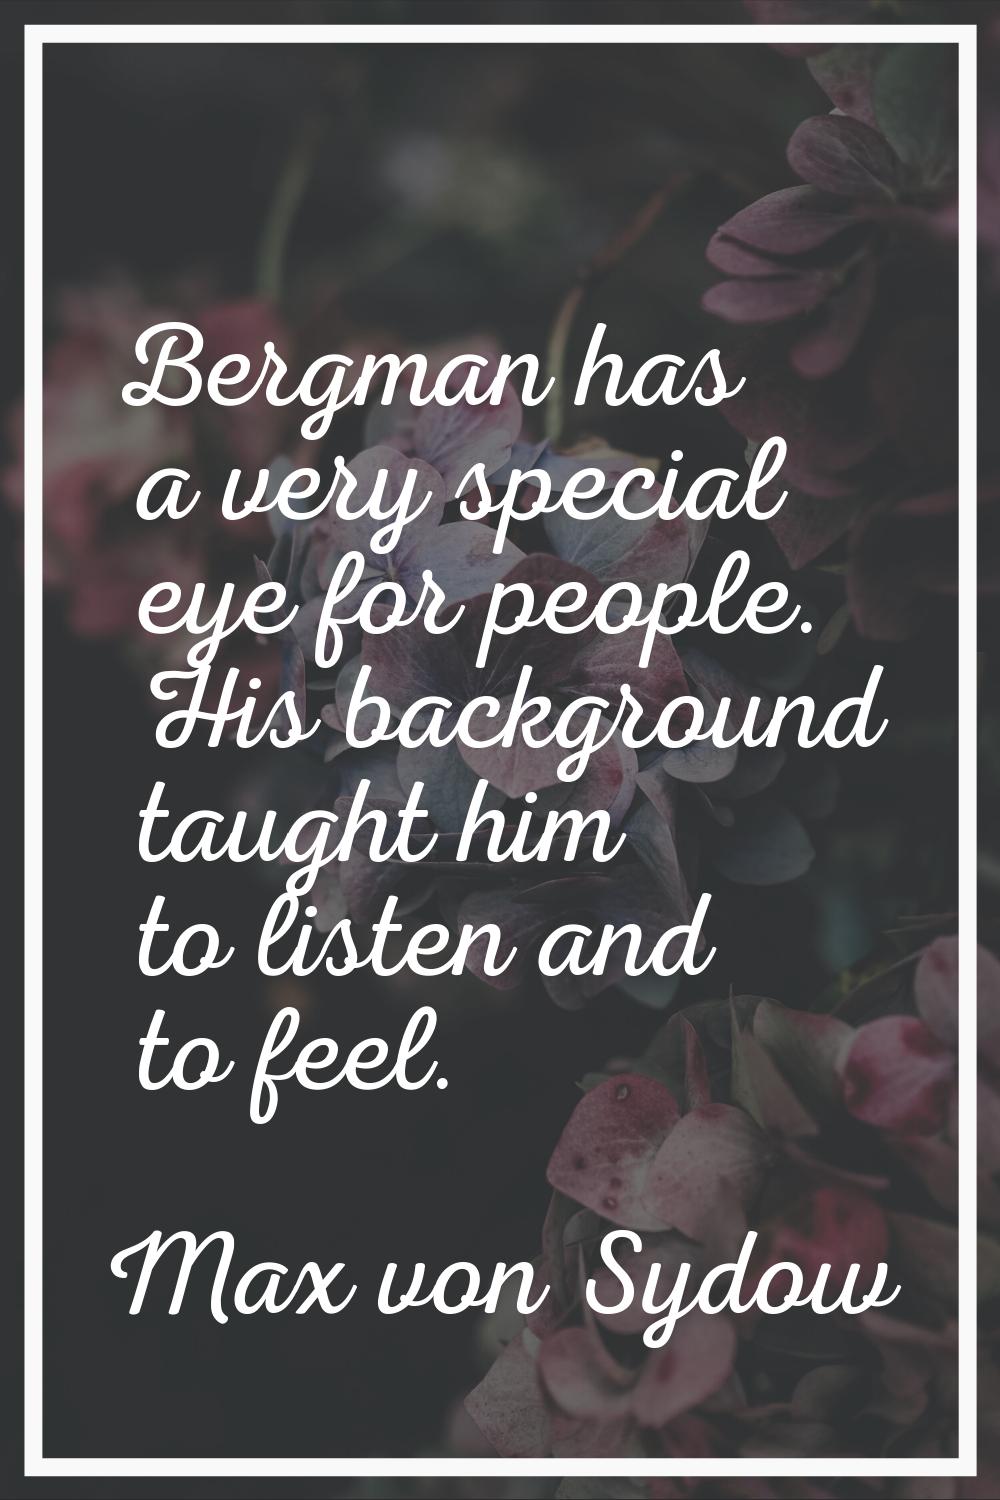 Bergman has a very special eye for people. His background taught him to listen and to feel.